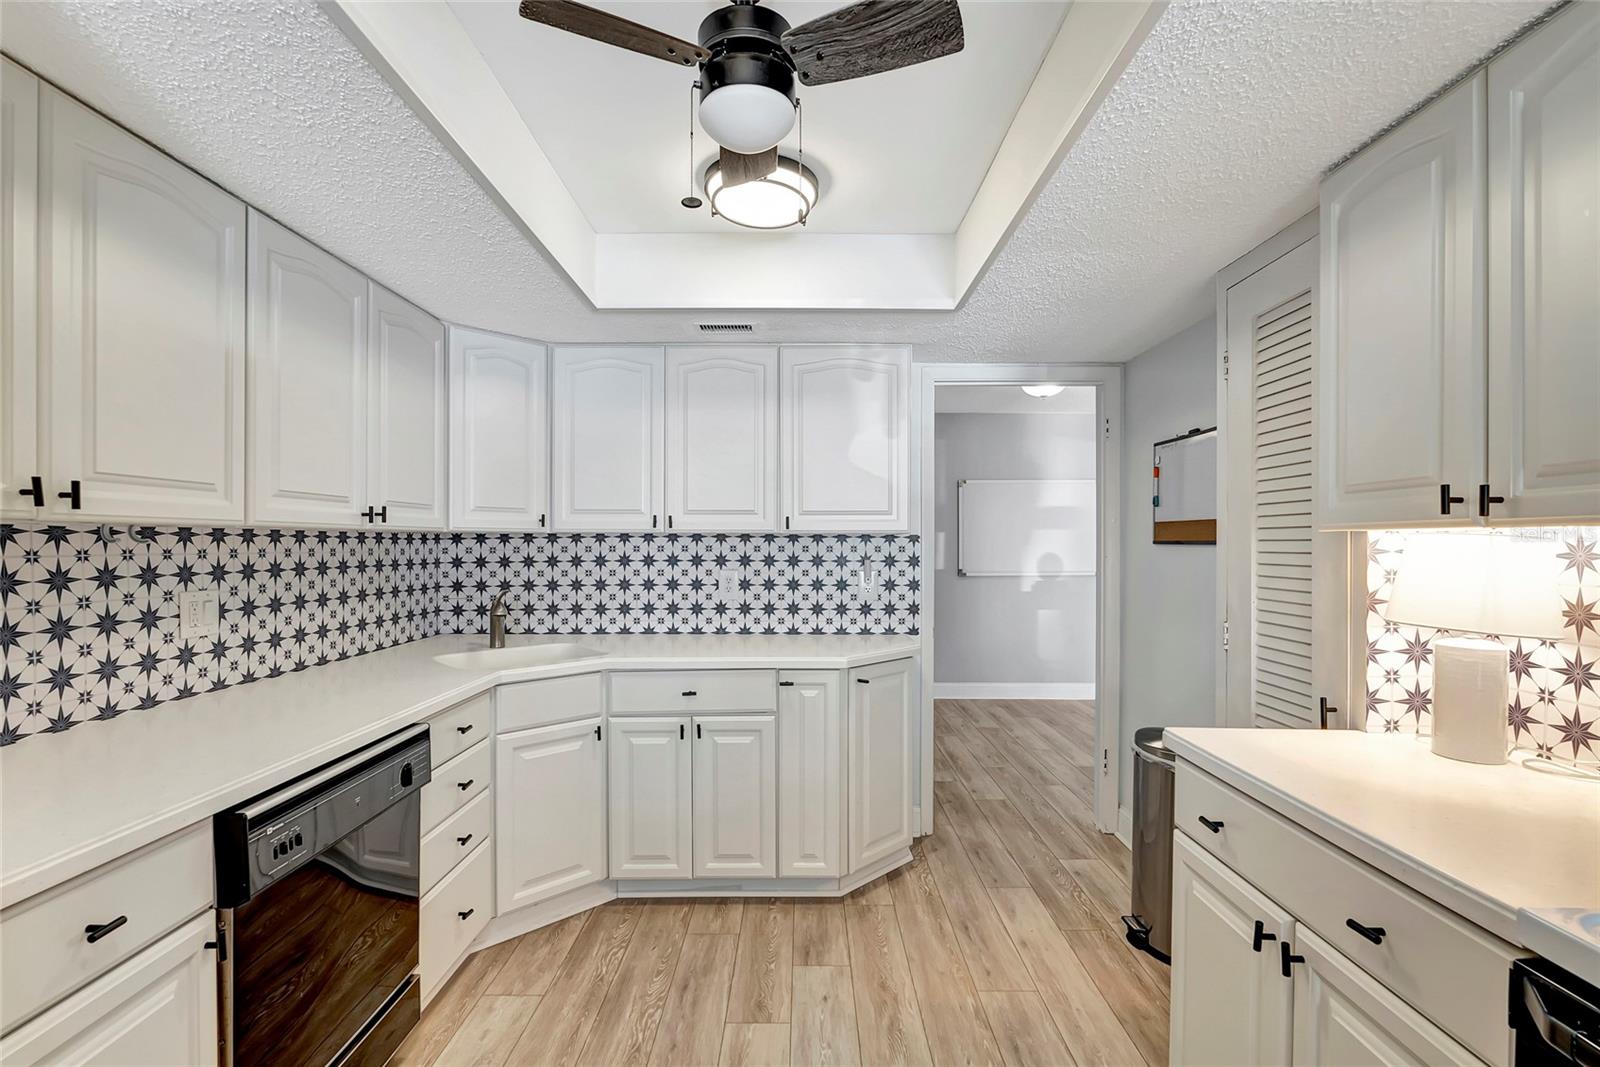 Surrounding you are rows upon rows of kitchen cabinets, offering ample space to stow away all your culinary essentials.